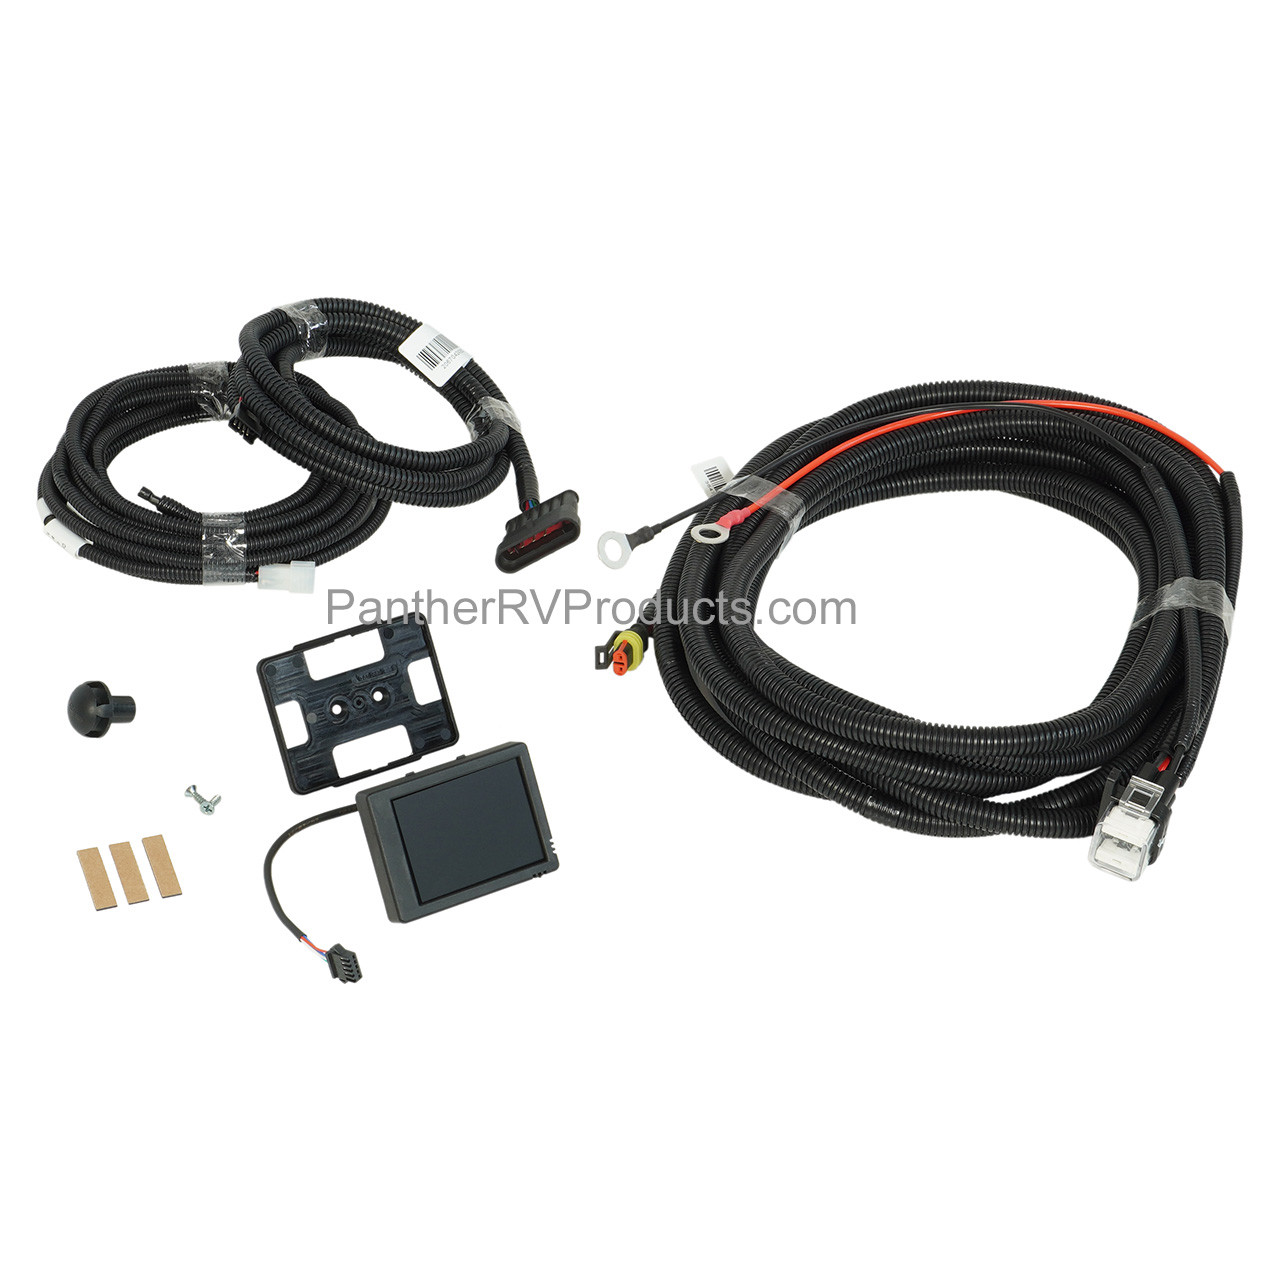 Air 2D kW Heater Kit with Controller- Autoterm - Cosy Campers